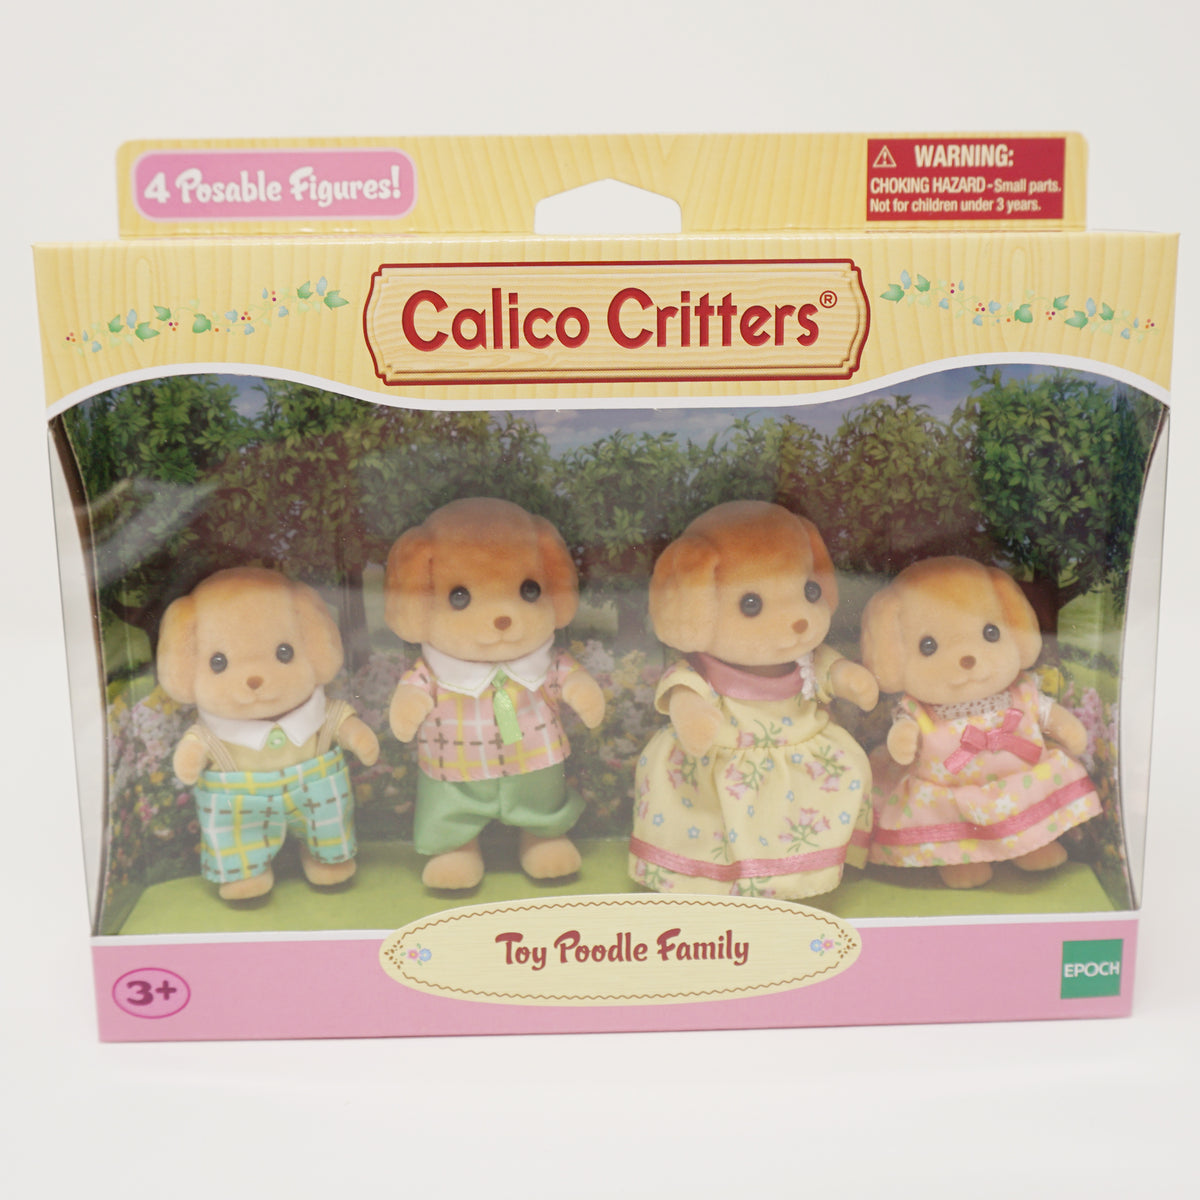 How to' for Sylvanian Families / Calico Critters 